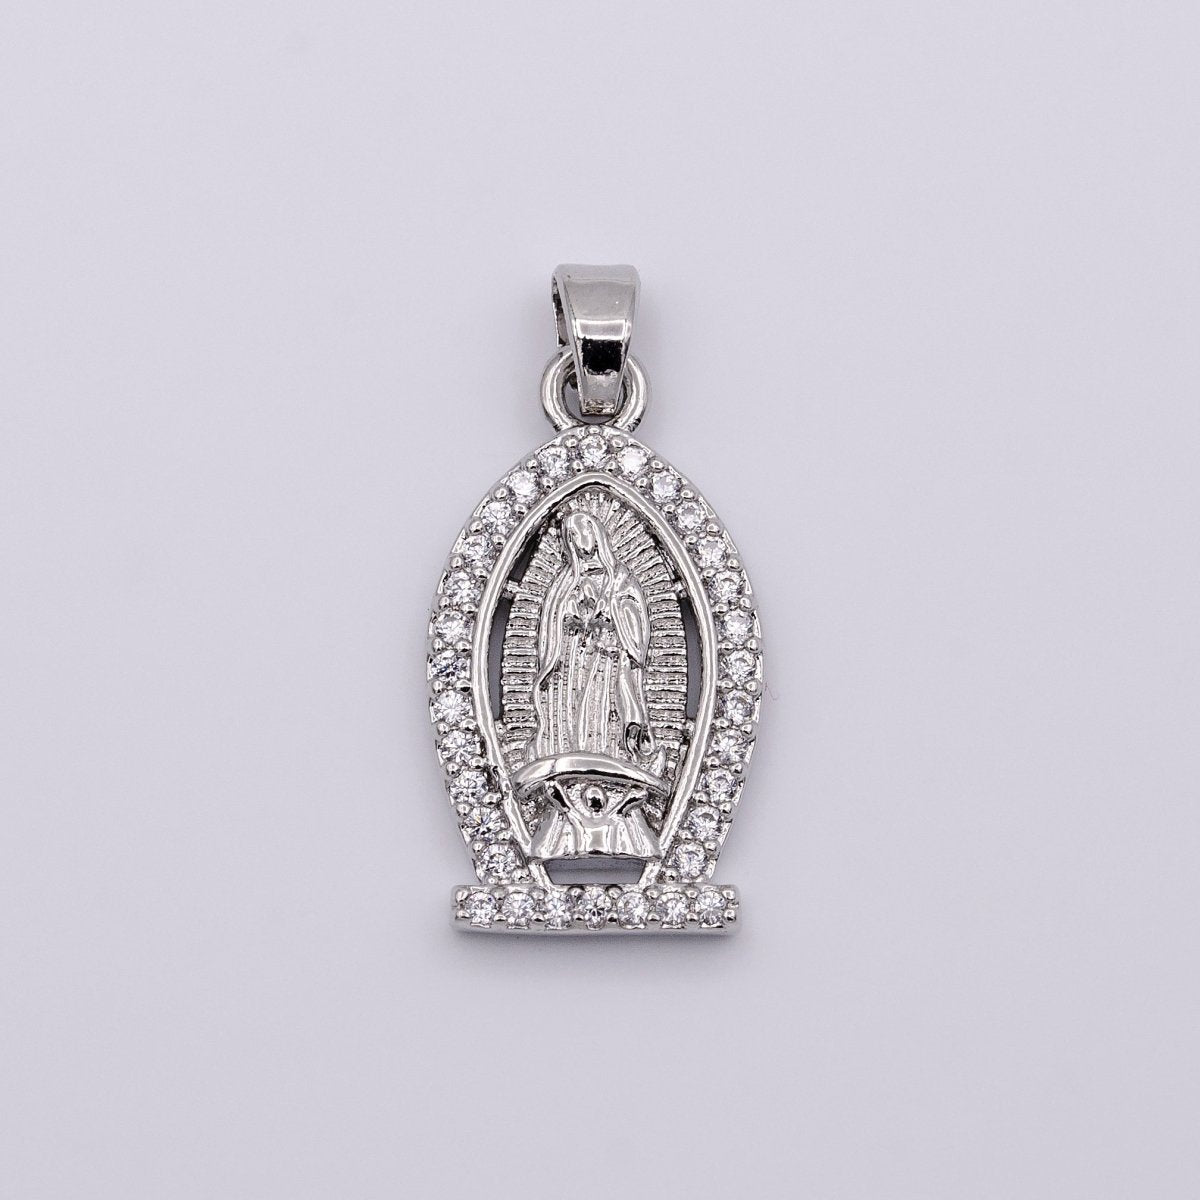 Gold Filled Lady Guadalupe Virgin Mary Medallion Pendant Micro Pave Religious Jewelry Supply AA432 AA433 - DLUXCA